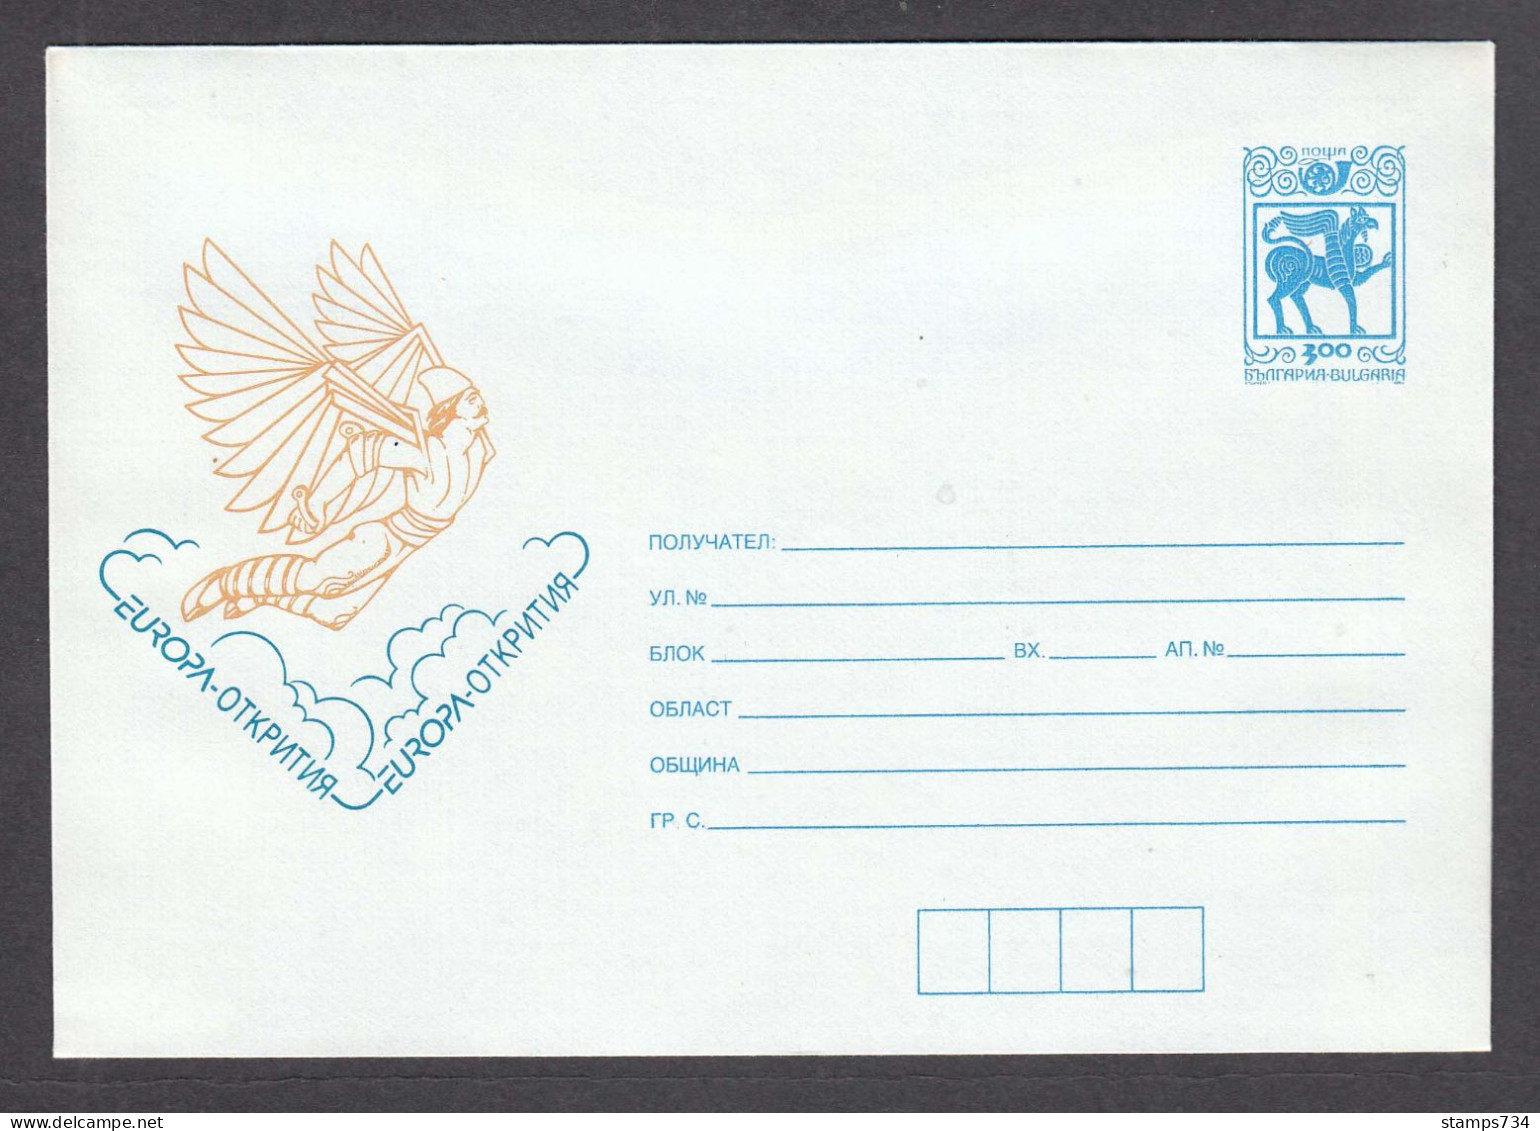 PS 1216/1994 - Mint, EUROPA: Discoveries, Post. Stationery - Bulgaria - Covers